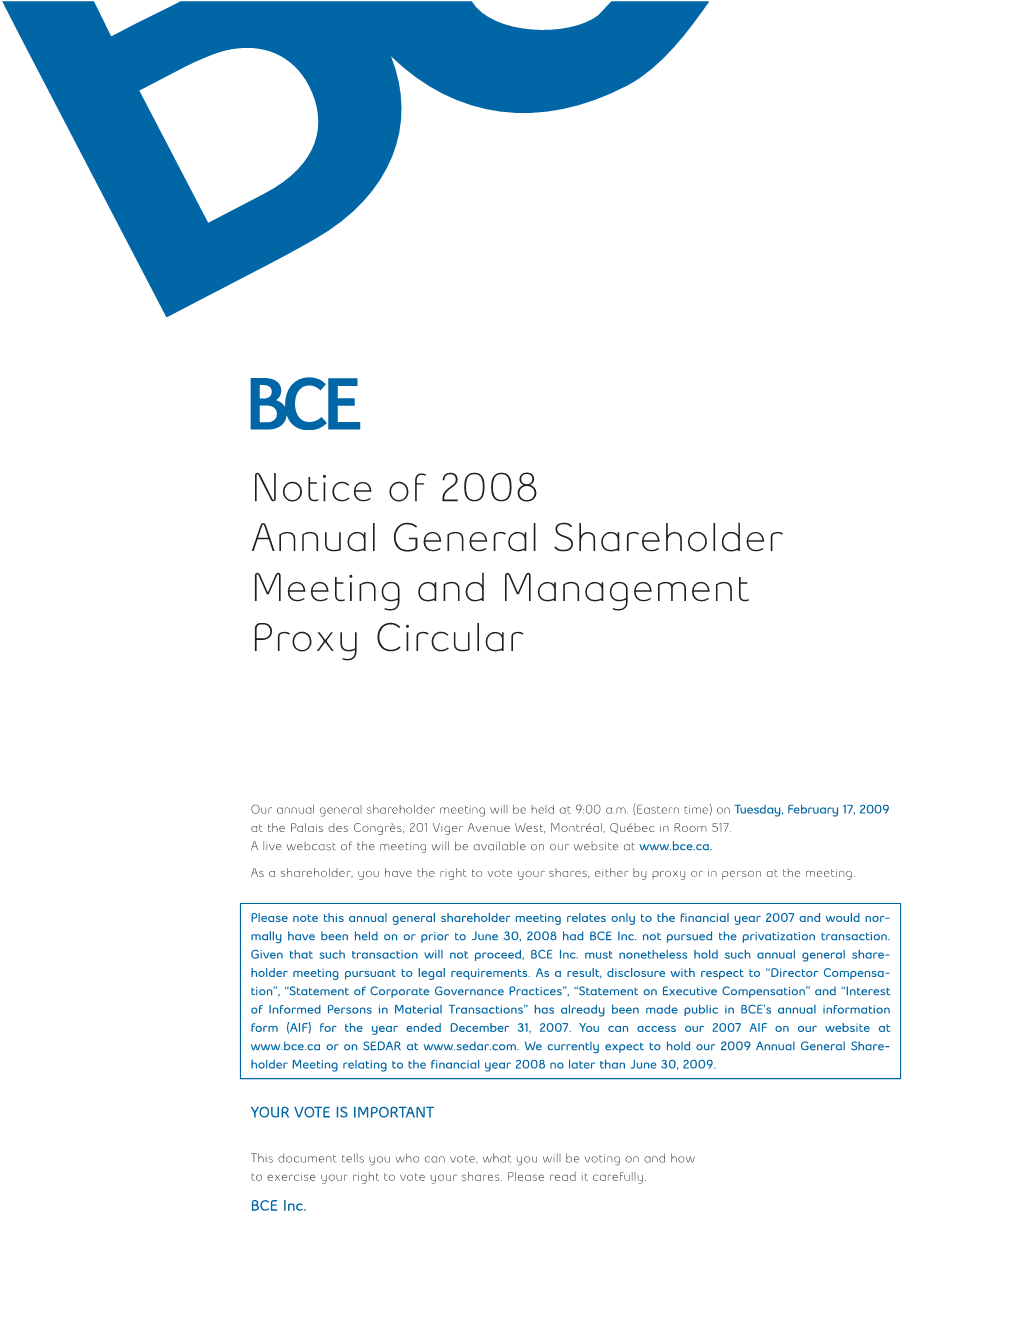 Notice of 2008 Annual General Shareholder Meeting and Management Proxy Circular